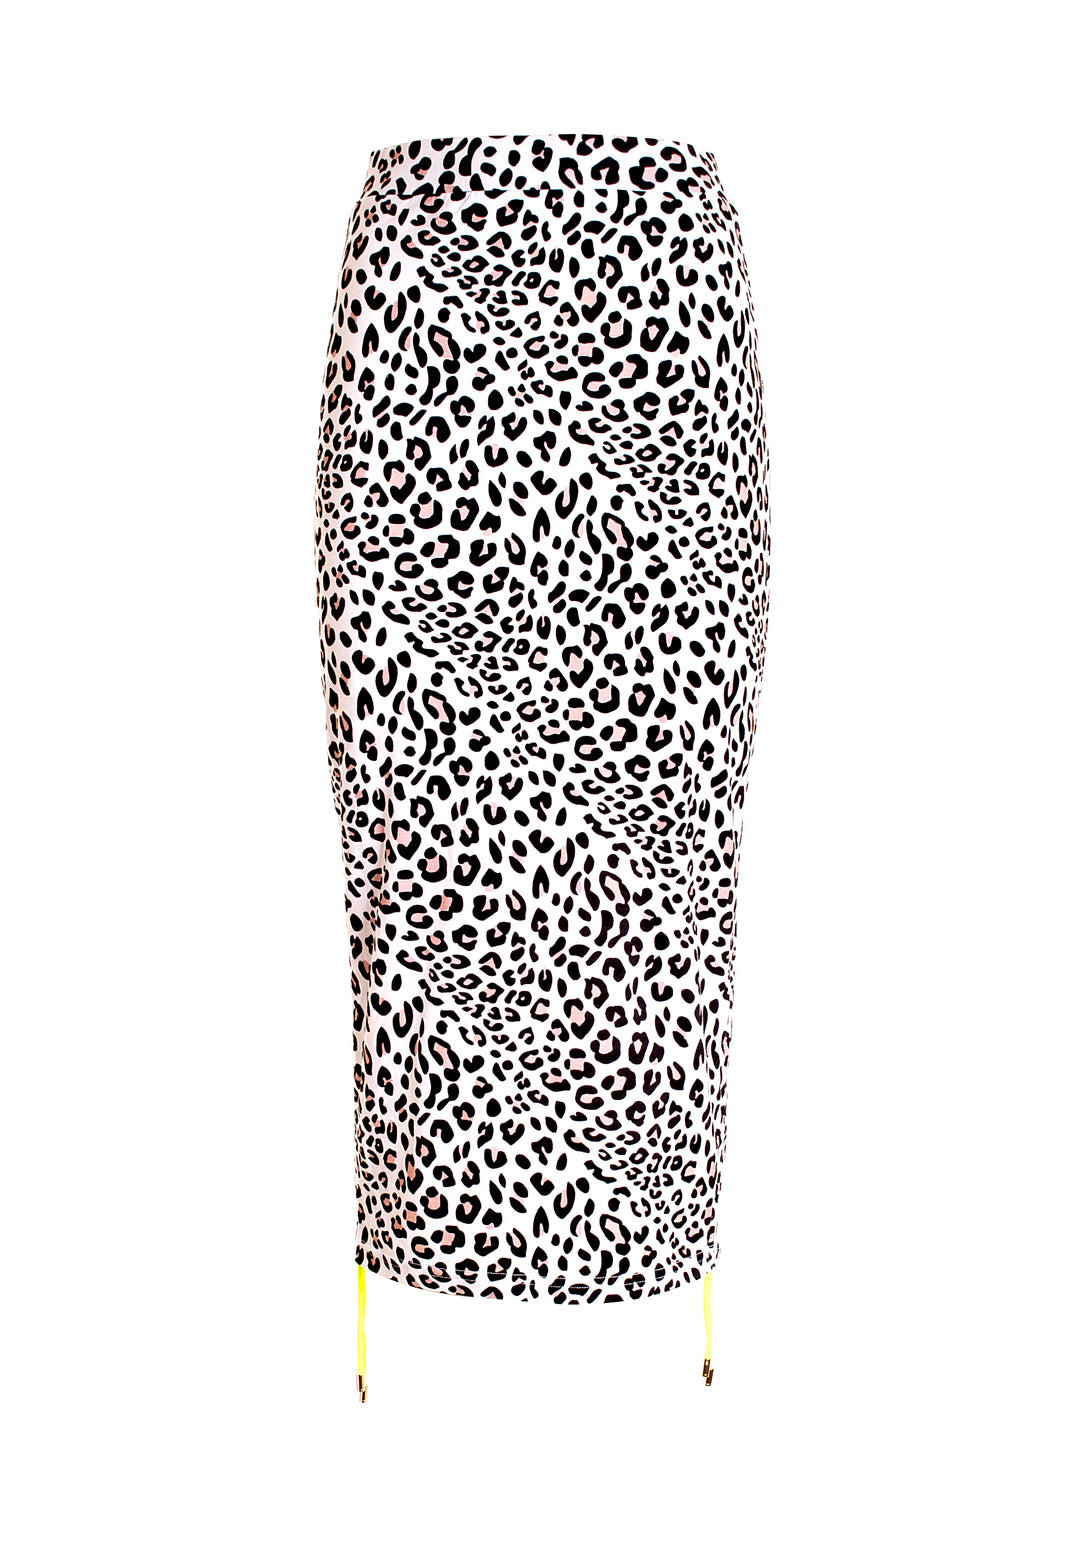 Long skirt slim fit made in jersey with animalier pattern